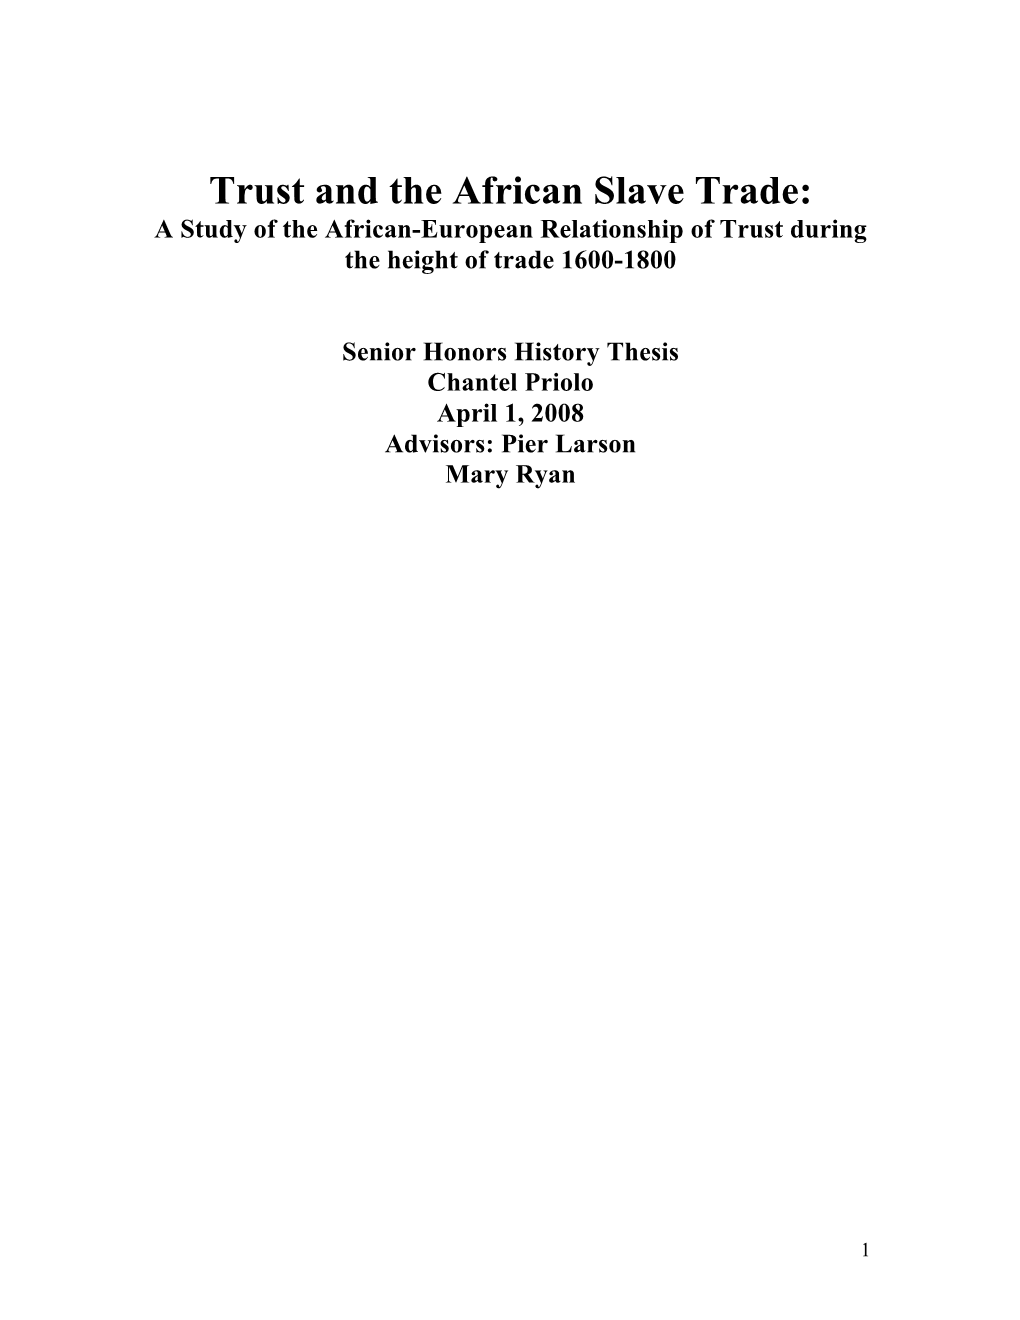 Trust and the African Slave Trade: a Study of the African-European Relationship of Trust During the Height of Trade 1600-1800